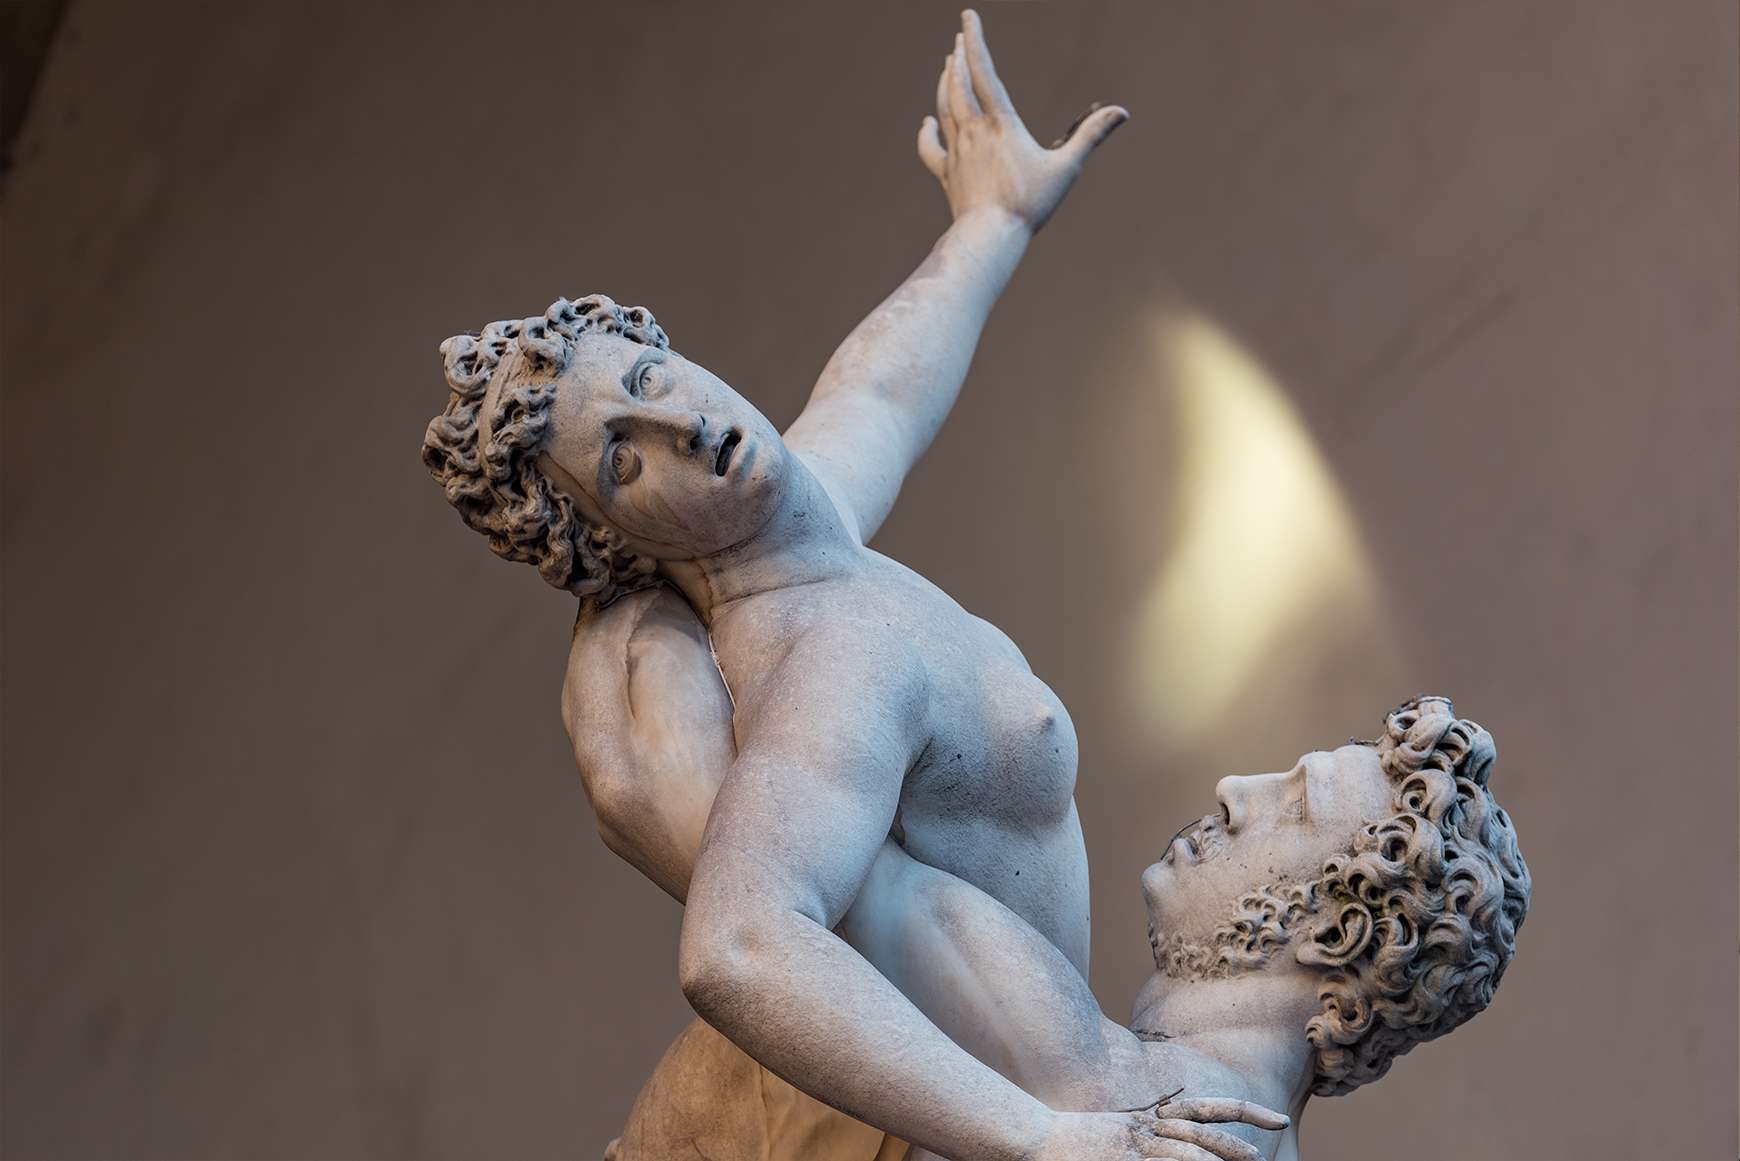 Statue of Intertwined bodies at the Galleria dell 'Accademia in Florence